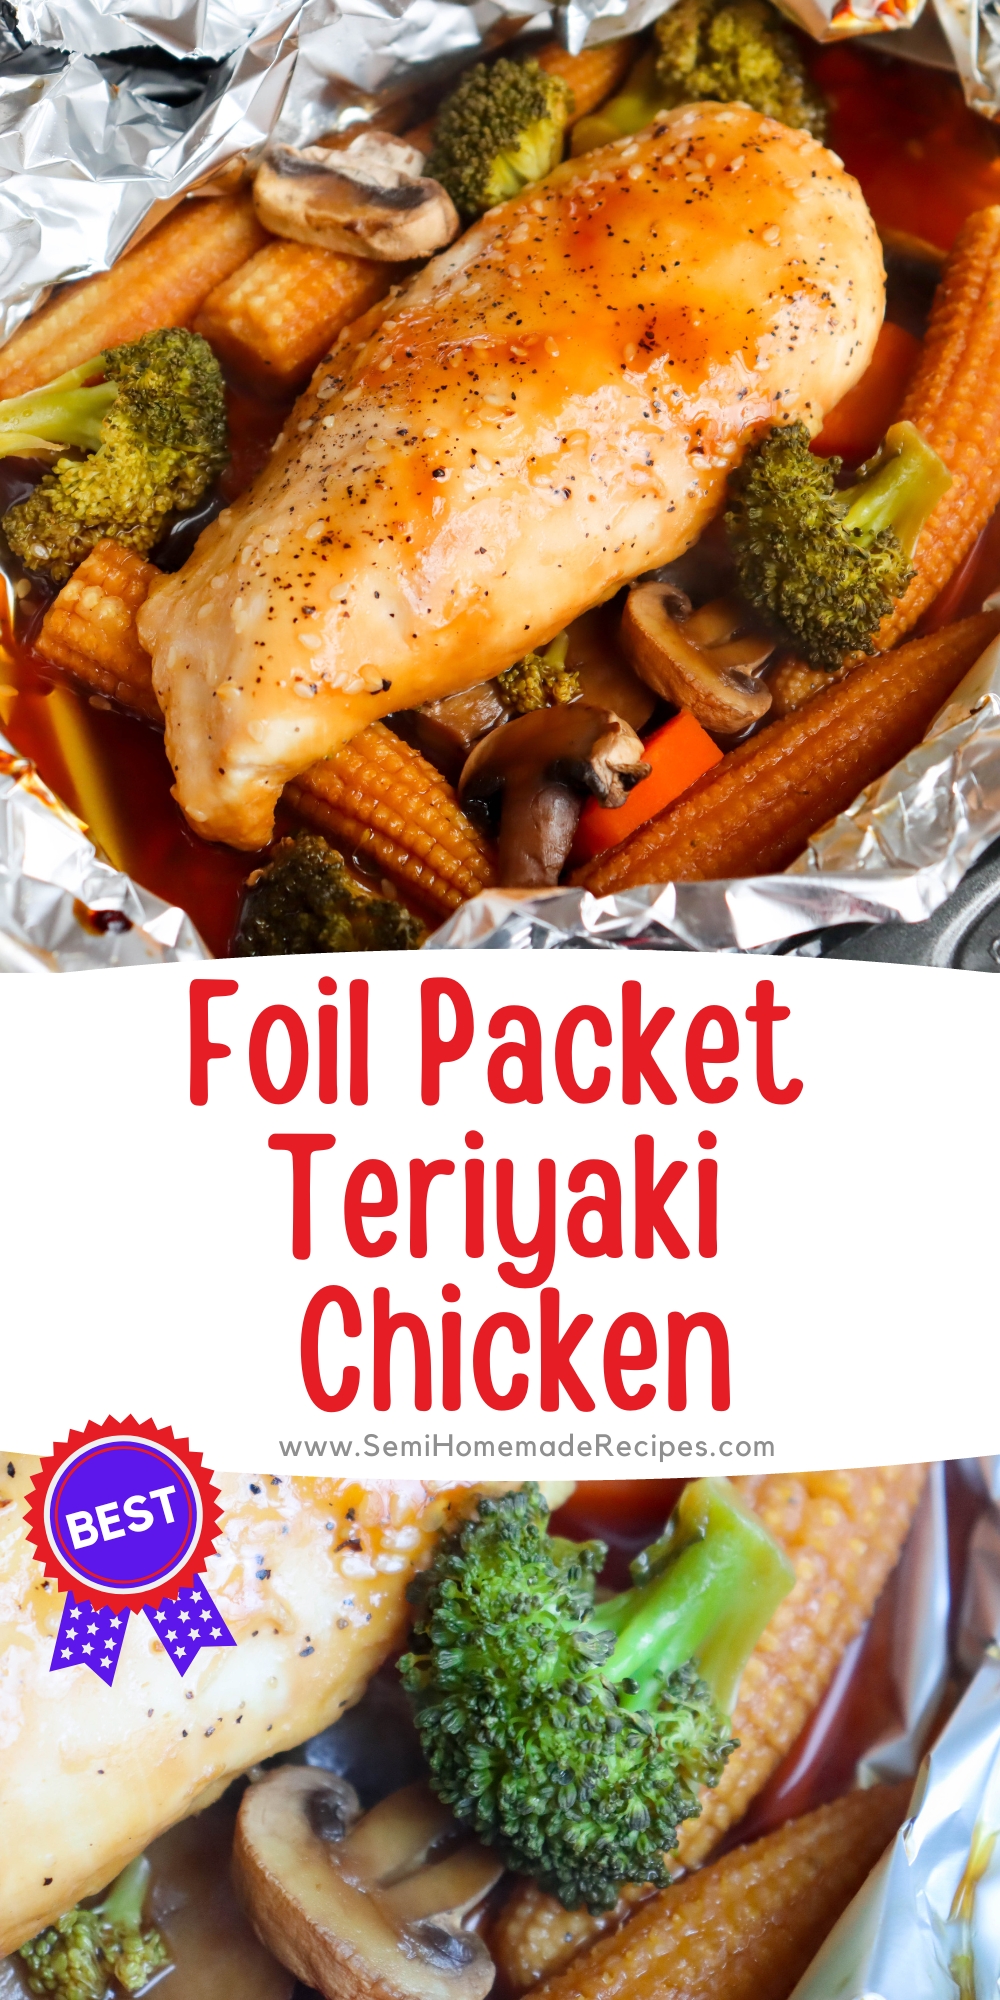 Ready for a delicious dinner that is ready in about 45 minutes? These Teriyaki Chicken Foil Packets are super easy to make and taste fantastic! Change up the veggies if needed and this will sure to be a new family favorite! 